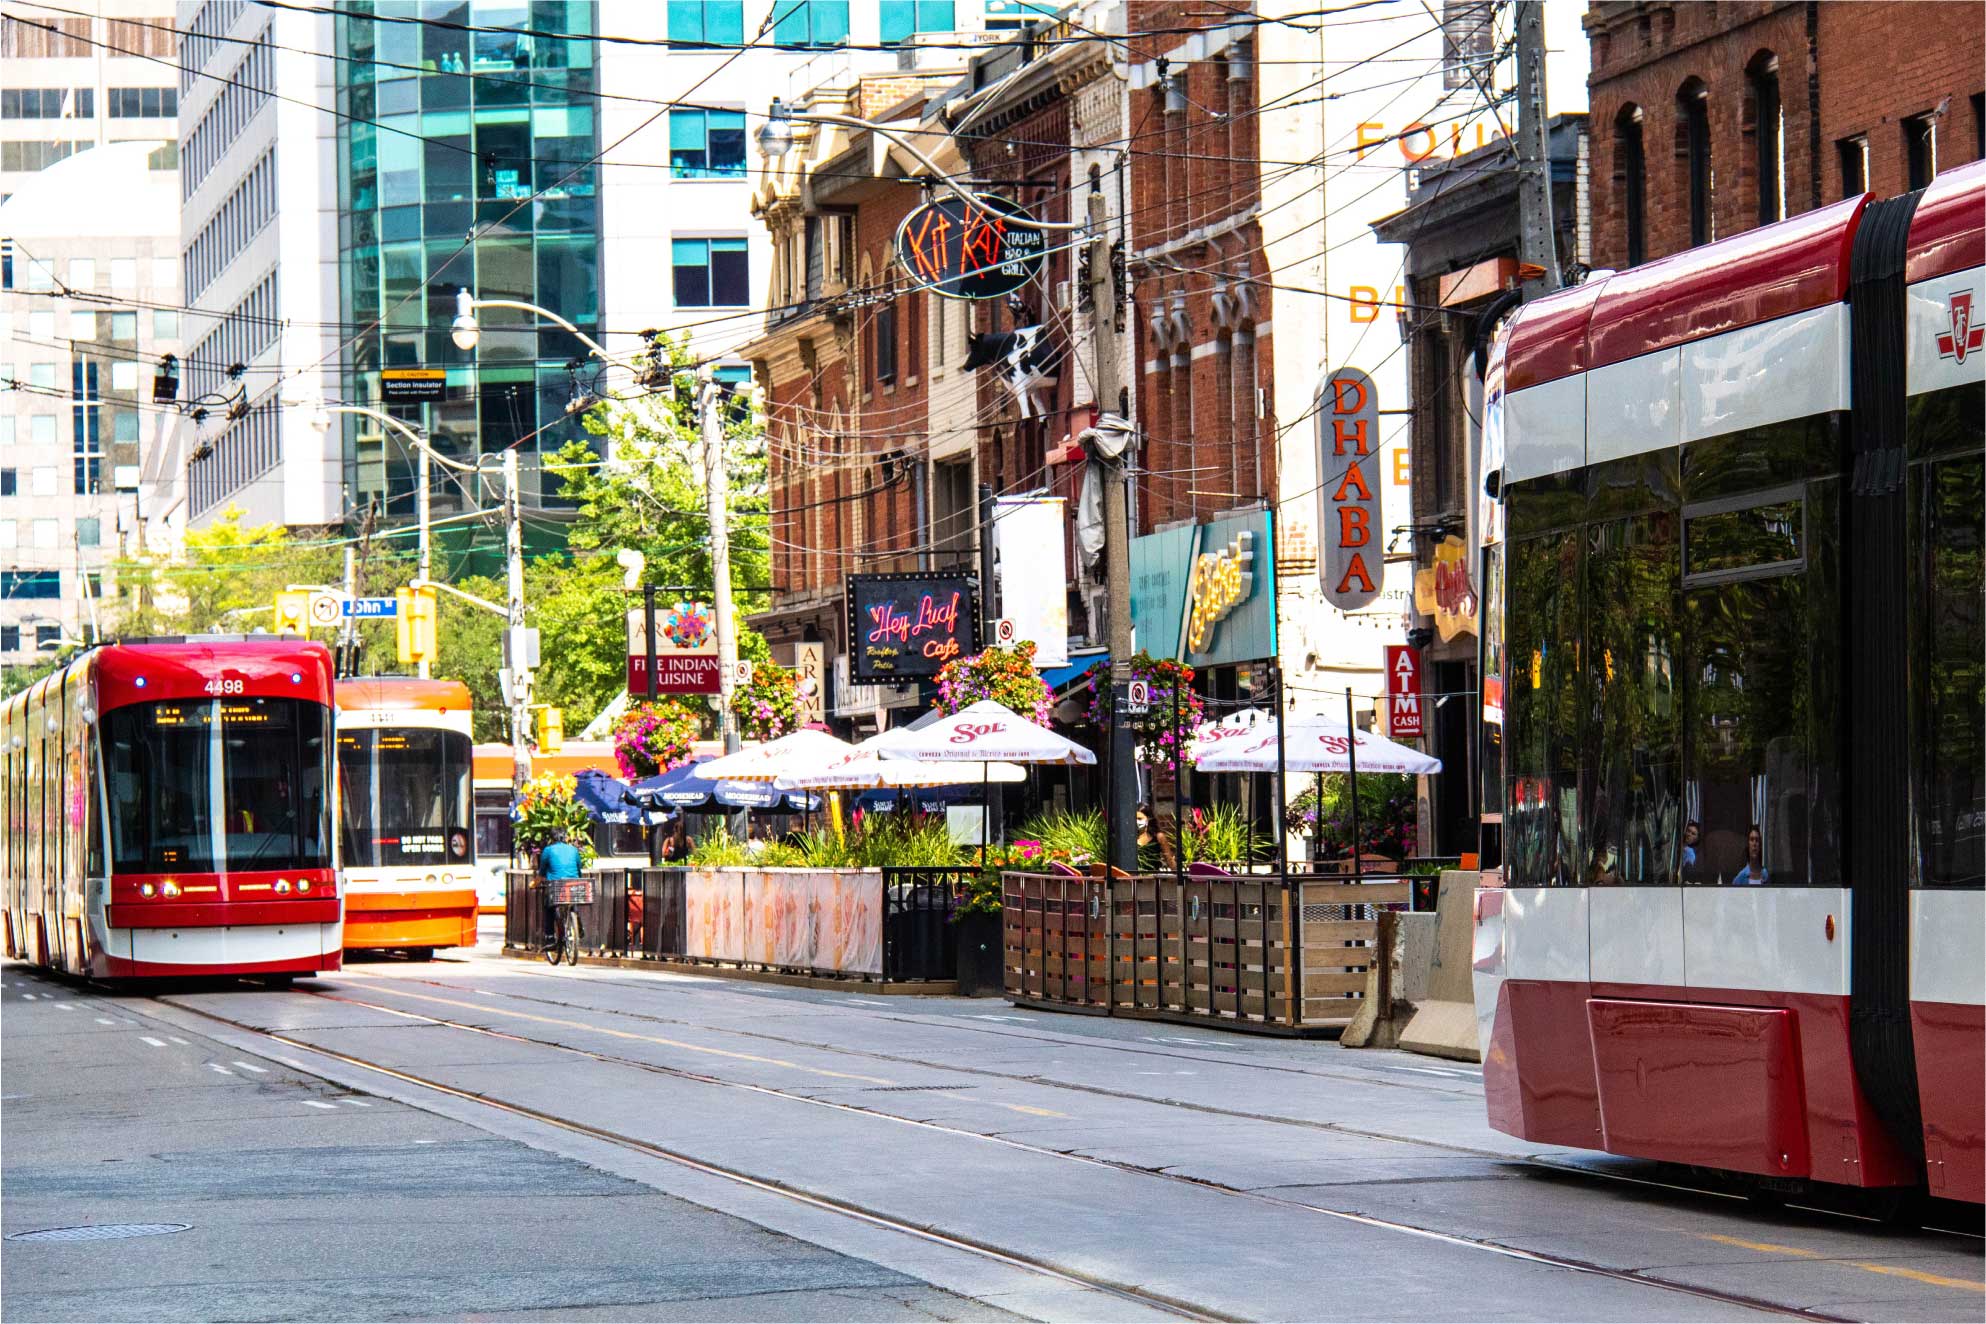 A photo of streetcars in Toronto, Ontario. Restaurants are in the background, with patio seating on the sidewalk. Photo by Debora Fontana on Unsplash